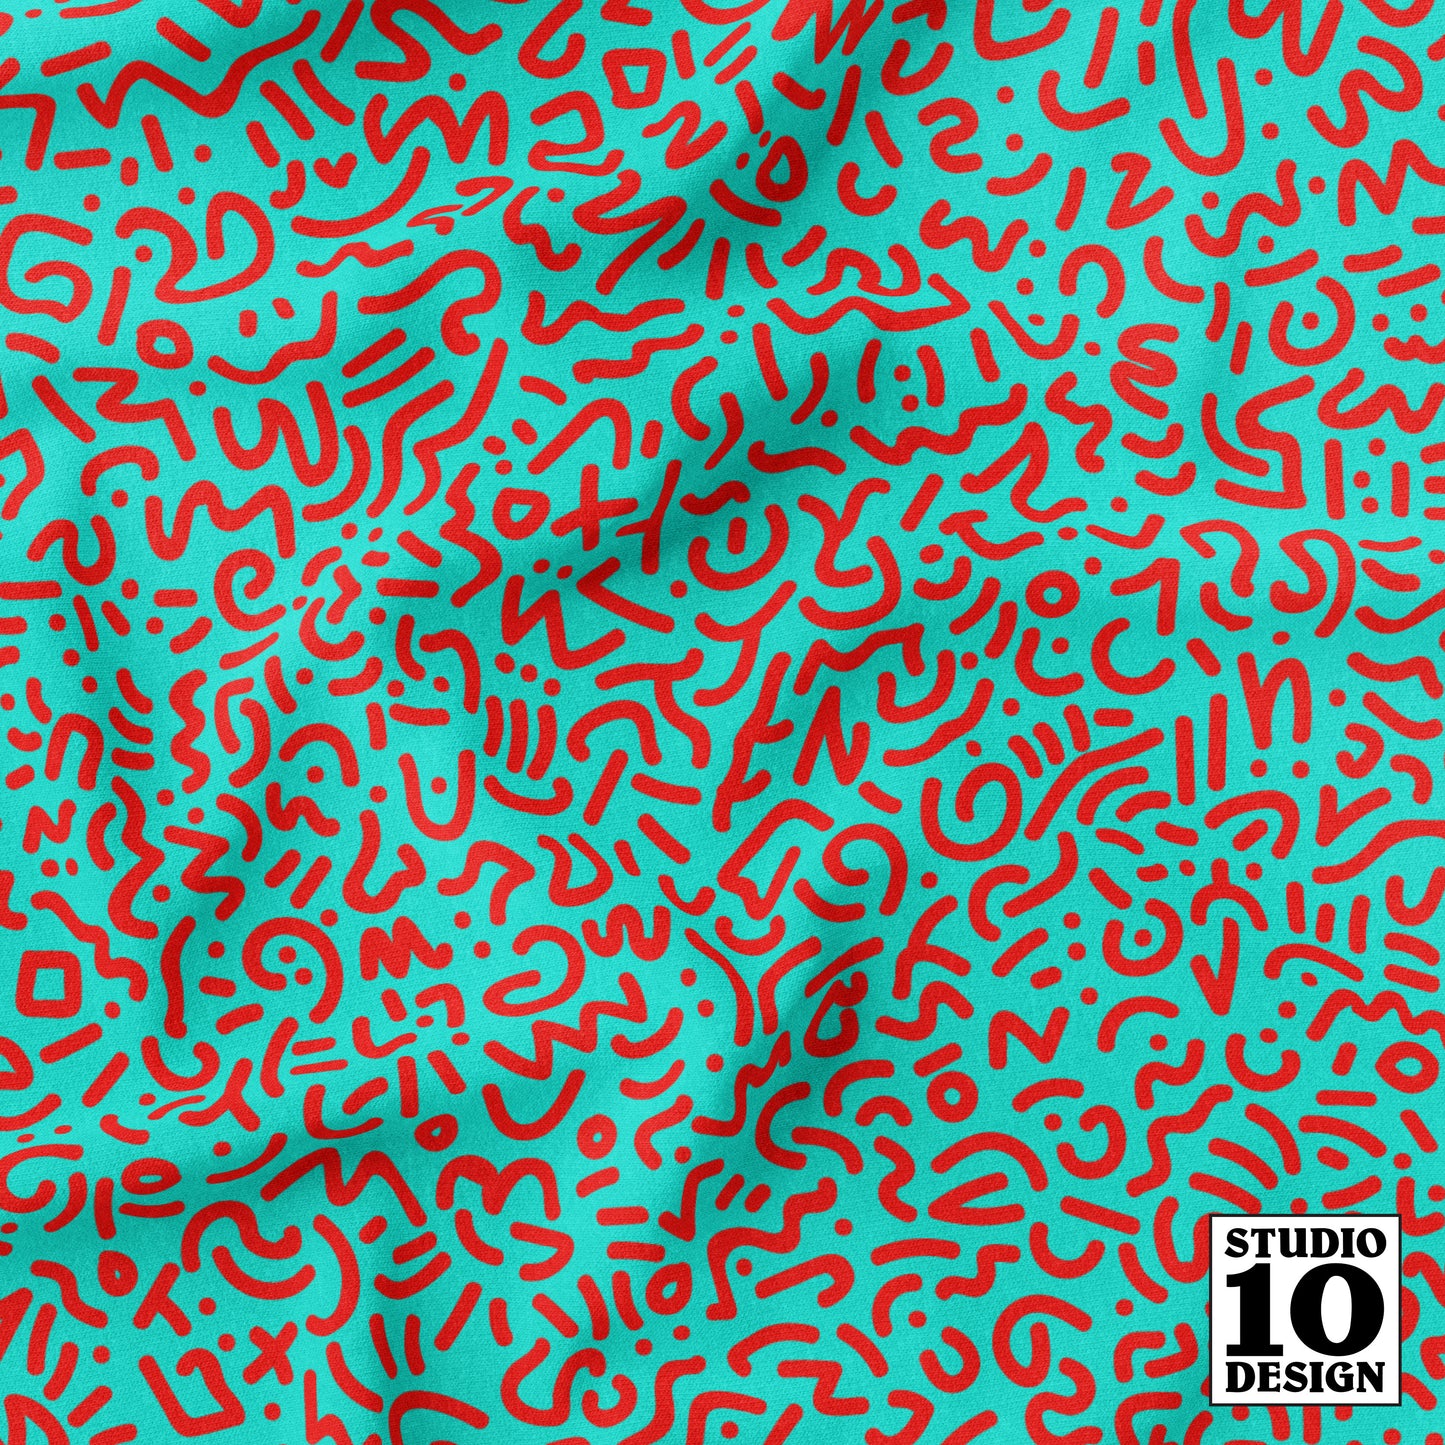 Doodle Red+Teal Printed Fabric by Studio Ten Design